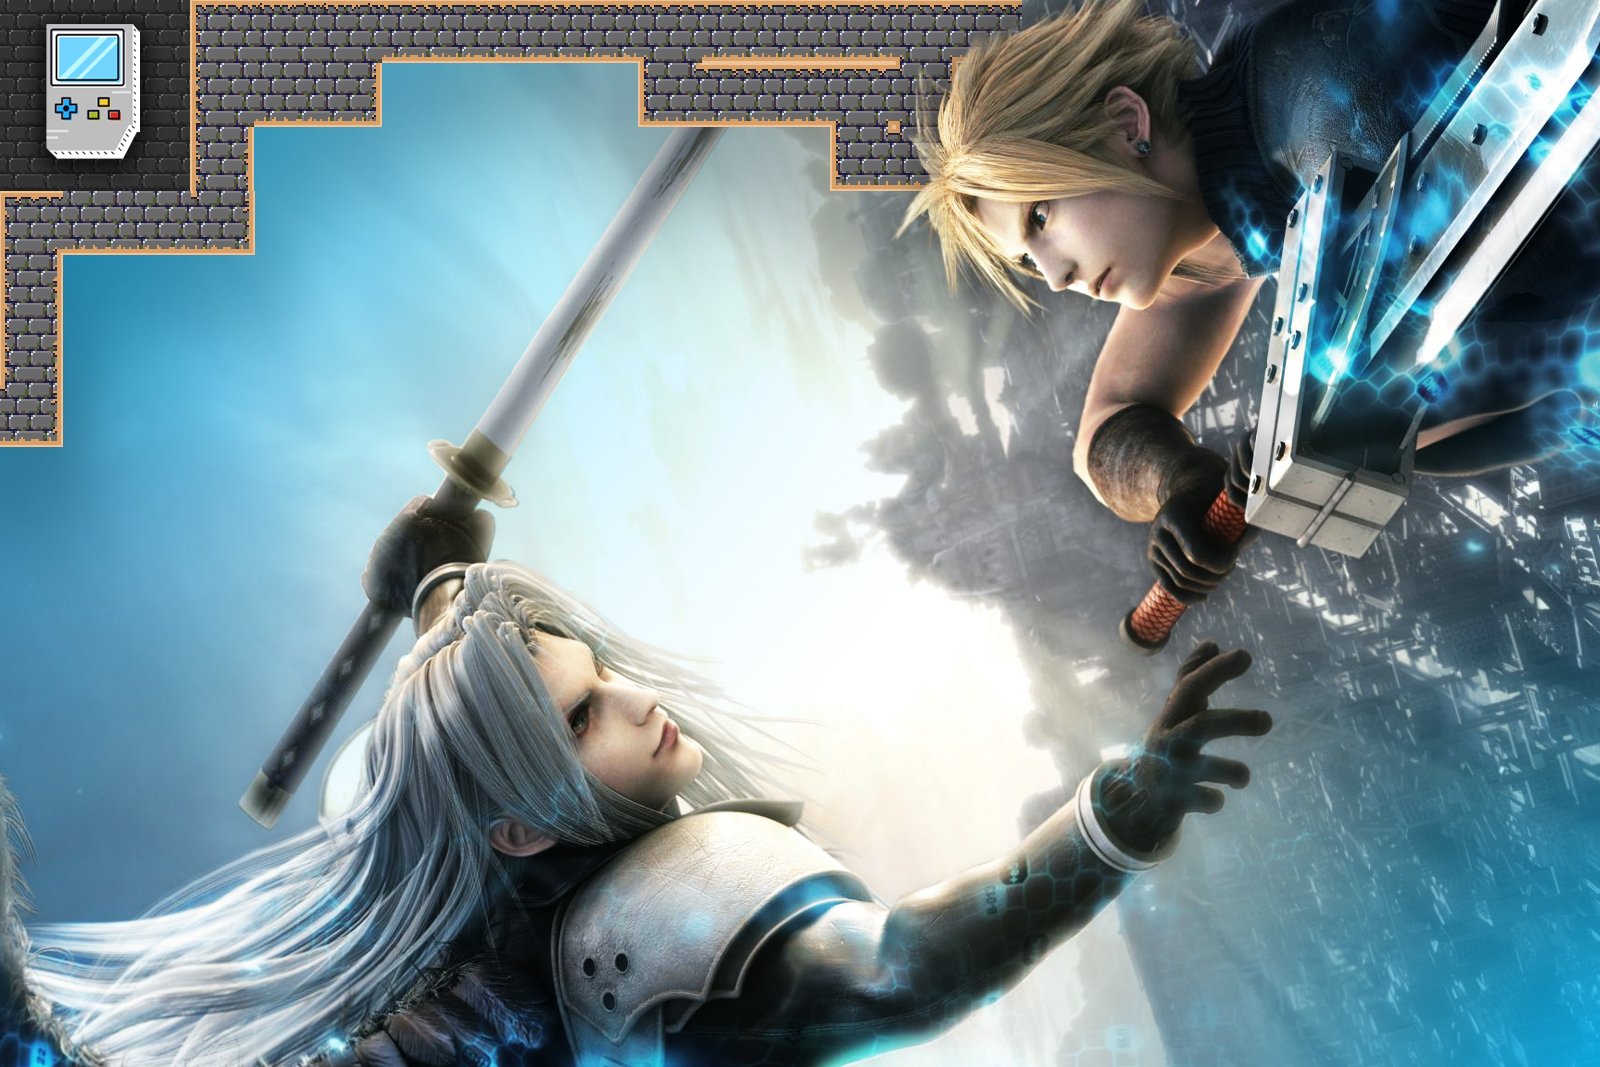 Final Fantasy game characters fighting